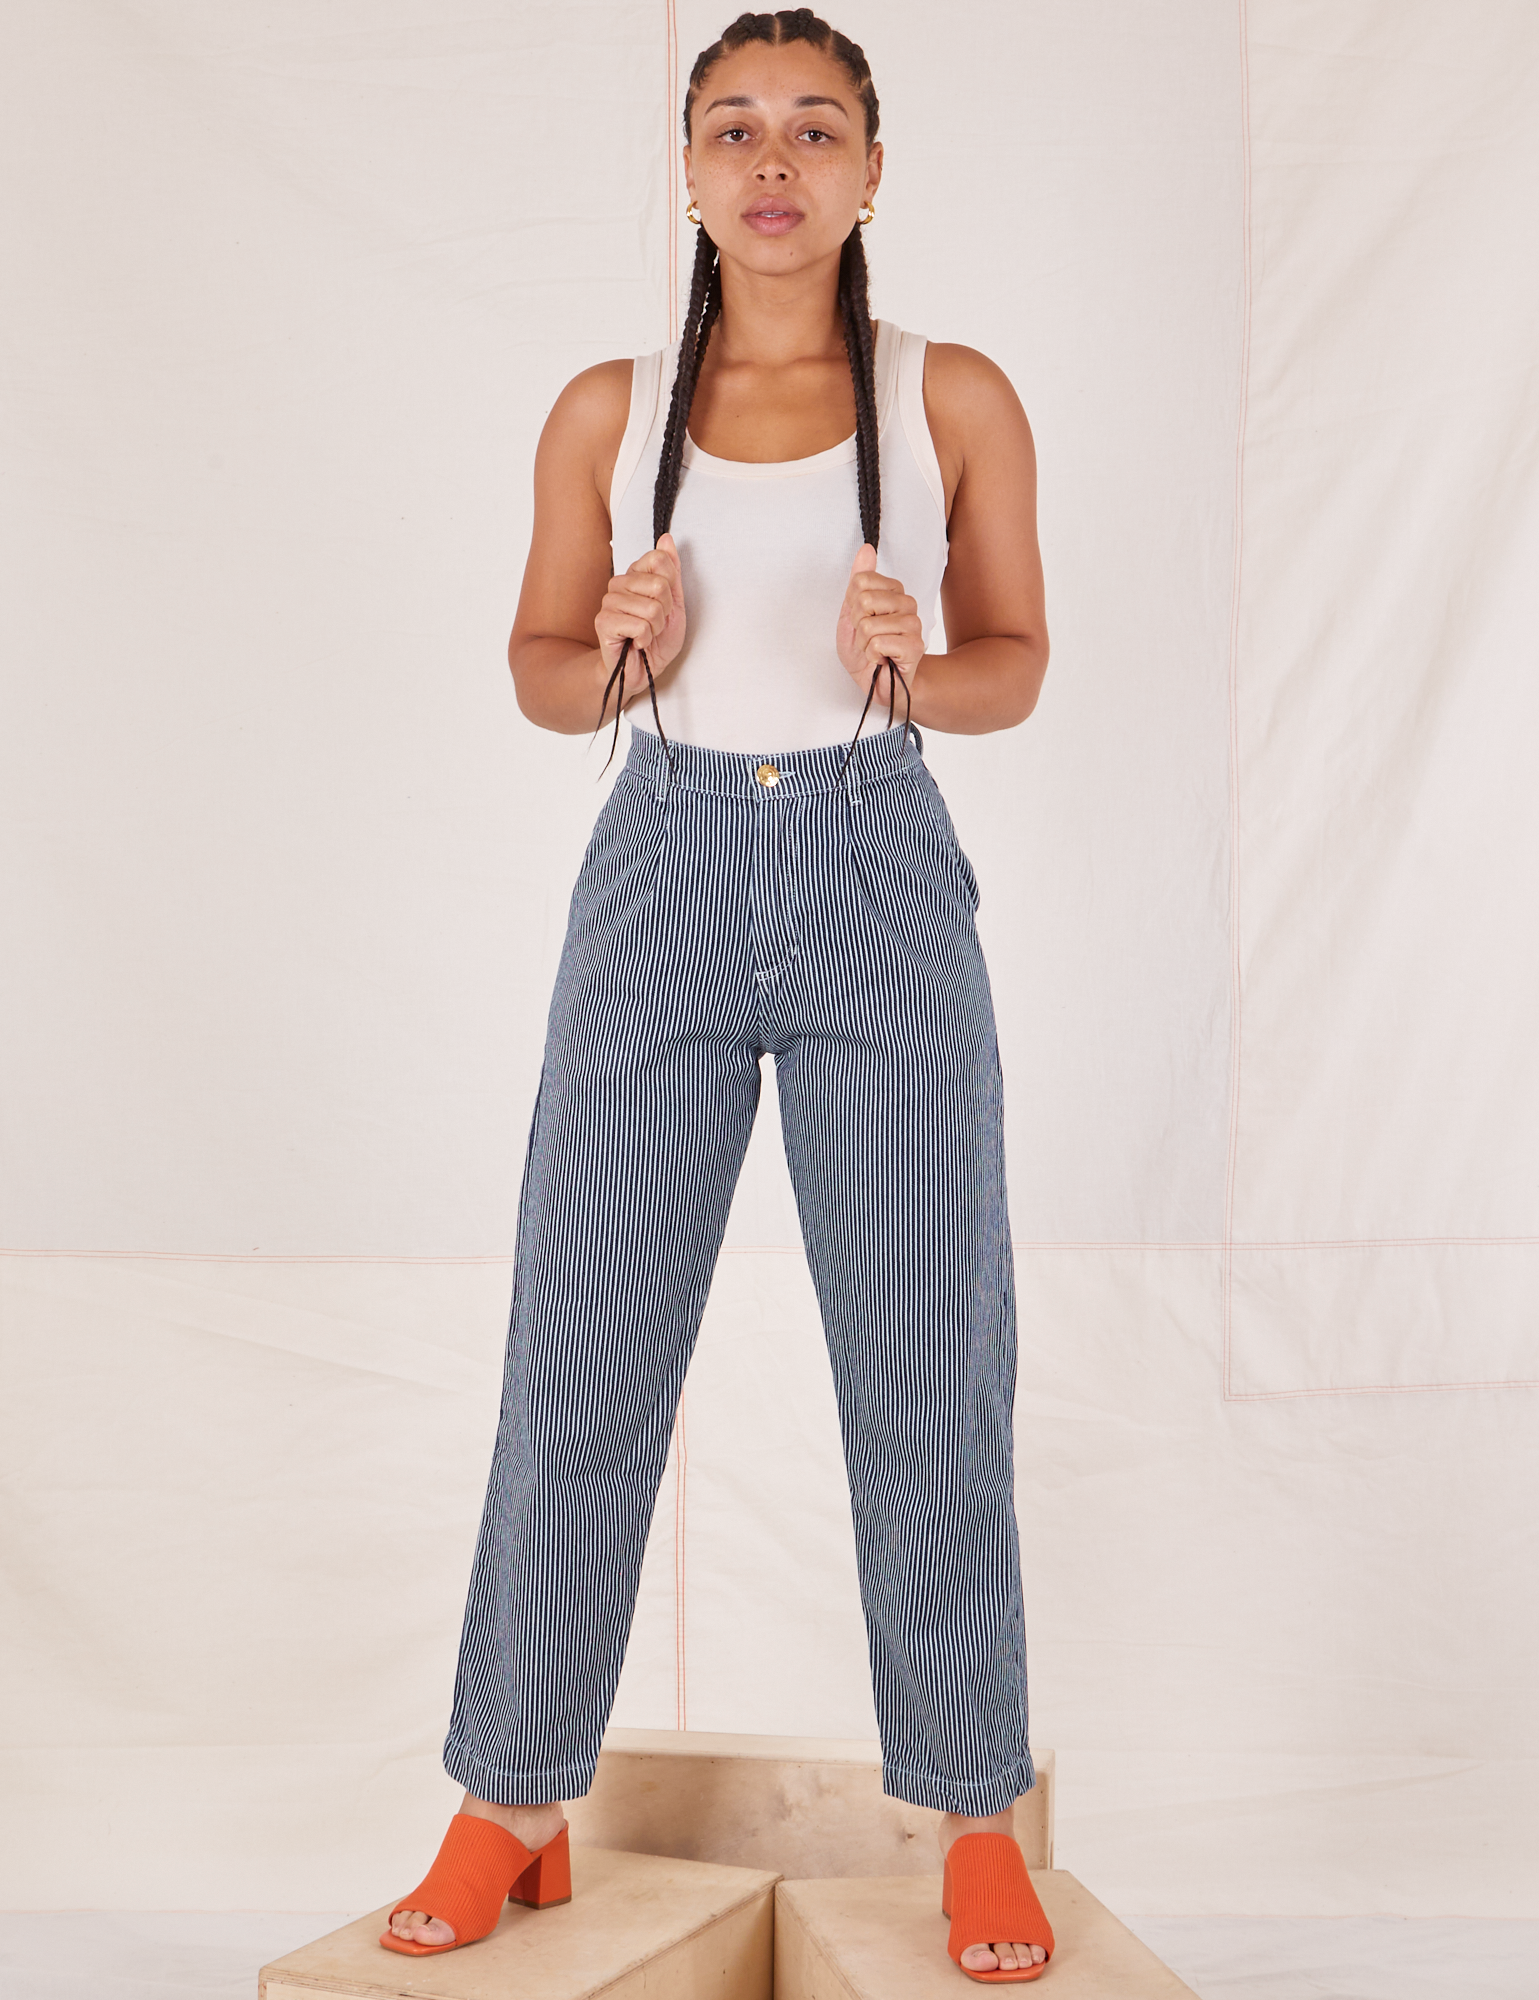 Gabi is 5&#39;7&quot; and wearing XXS Denim Trouser Jeans in Railroad Stripe paired with a vintage off-white Tank Top